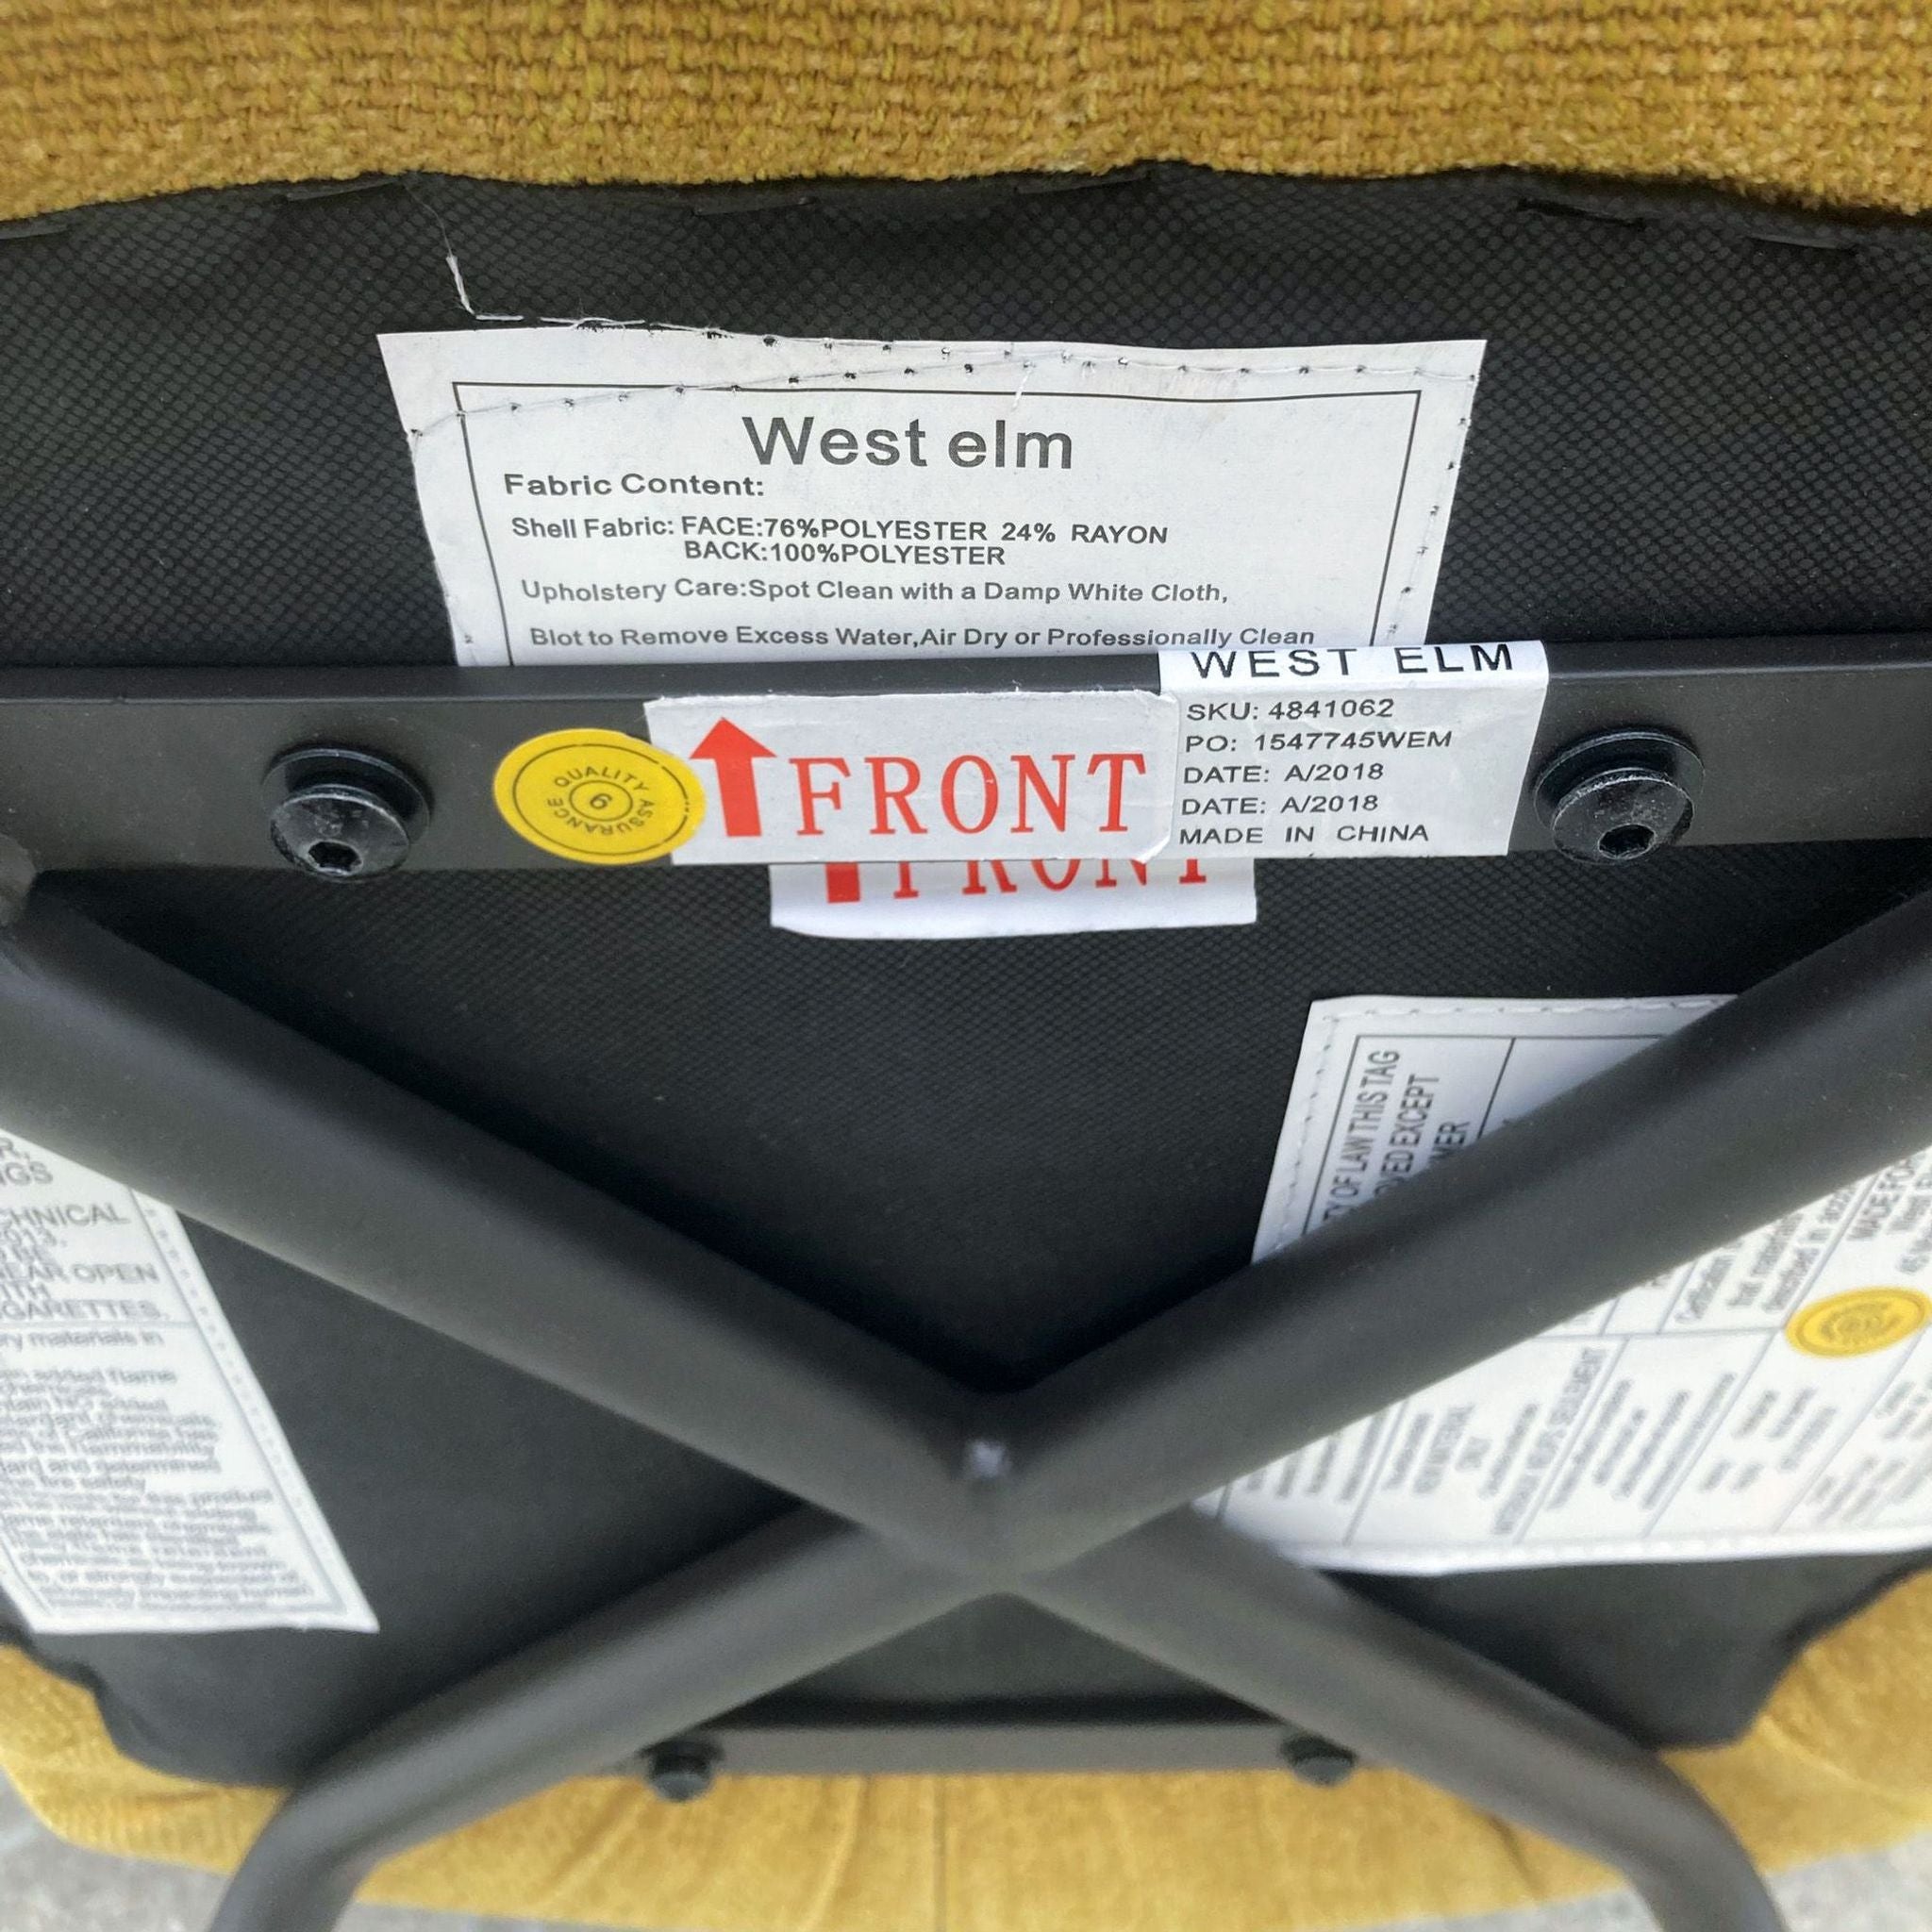 Underneath view of a West Elm dining chair showing fabric content label, quality control sticker, and care instructions.